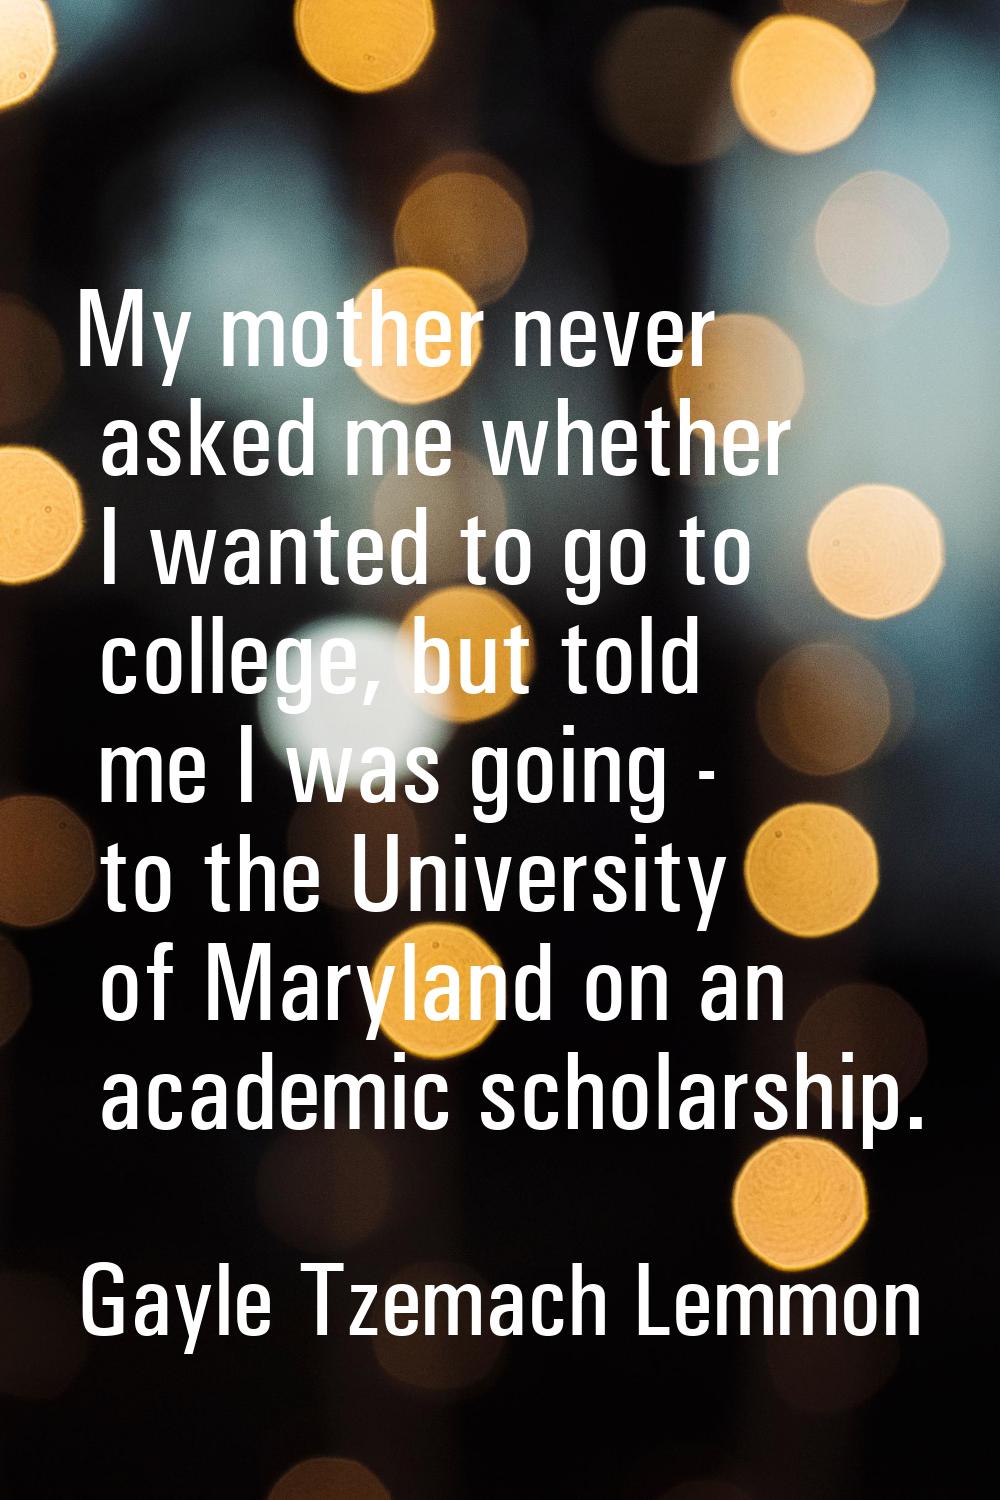 My mother never asked me whether I wanted to go to college, but told me I was going - to the Univer